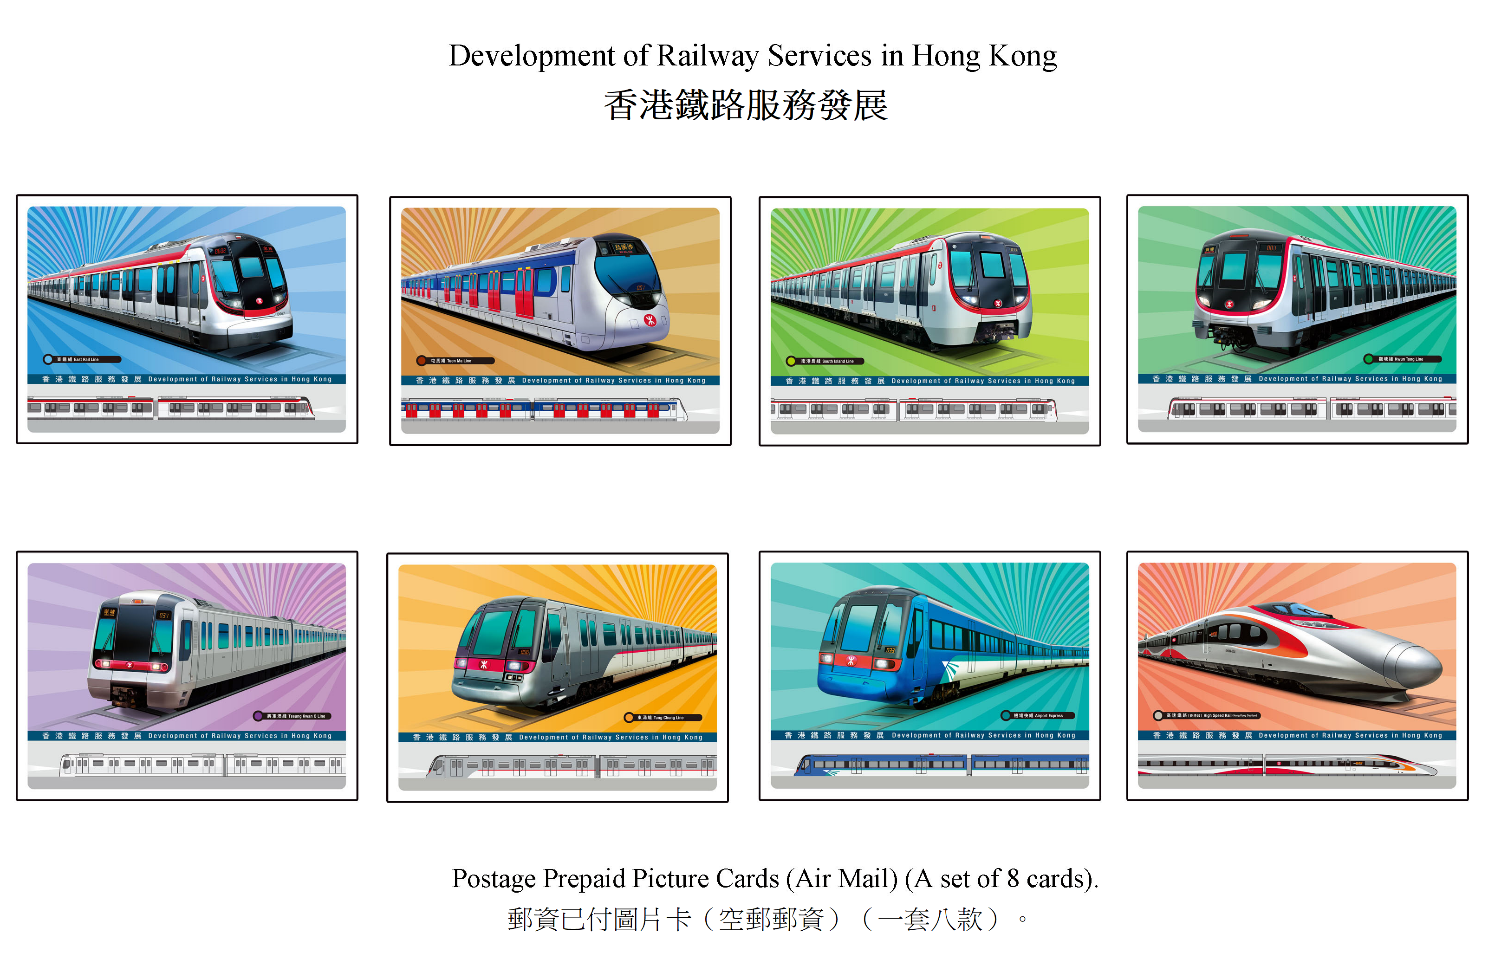 Hongkong Post will launch a special stamp issue and associated philatelic products on the theme of "Development of Railway Services in Hong Kong" on November 23 (Thursday). Photos show the postage prepaid picture cards (air mail).
